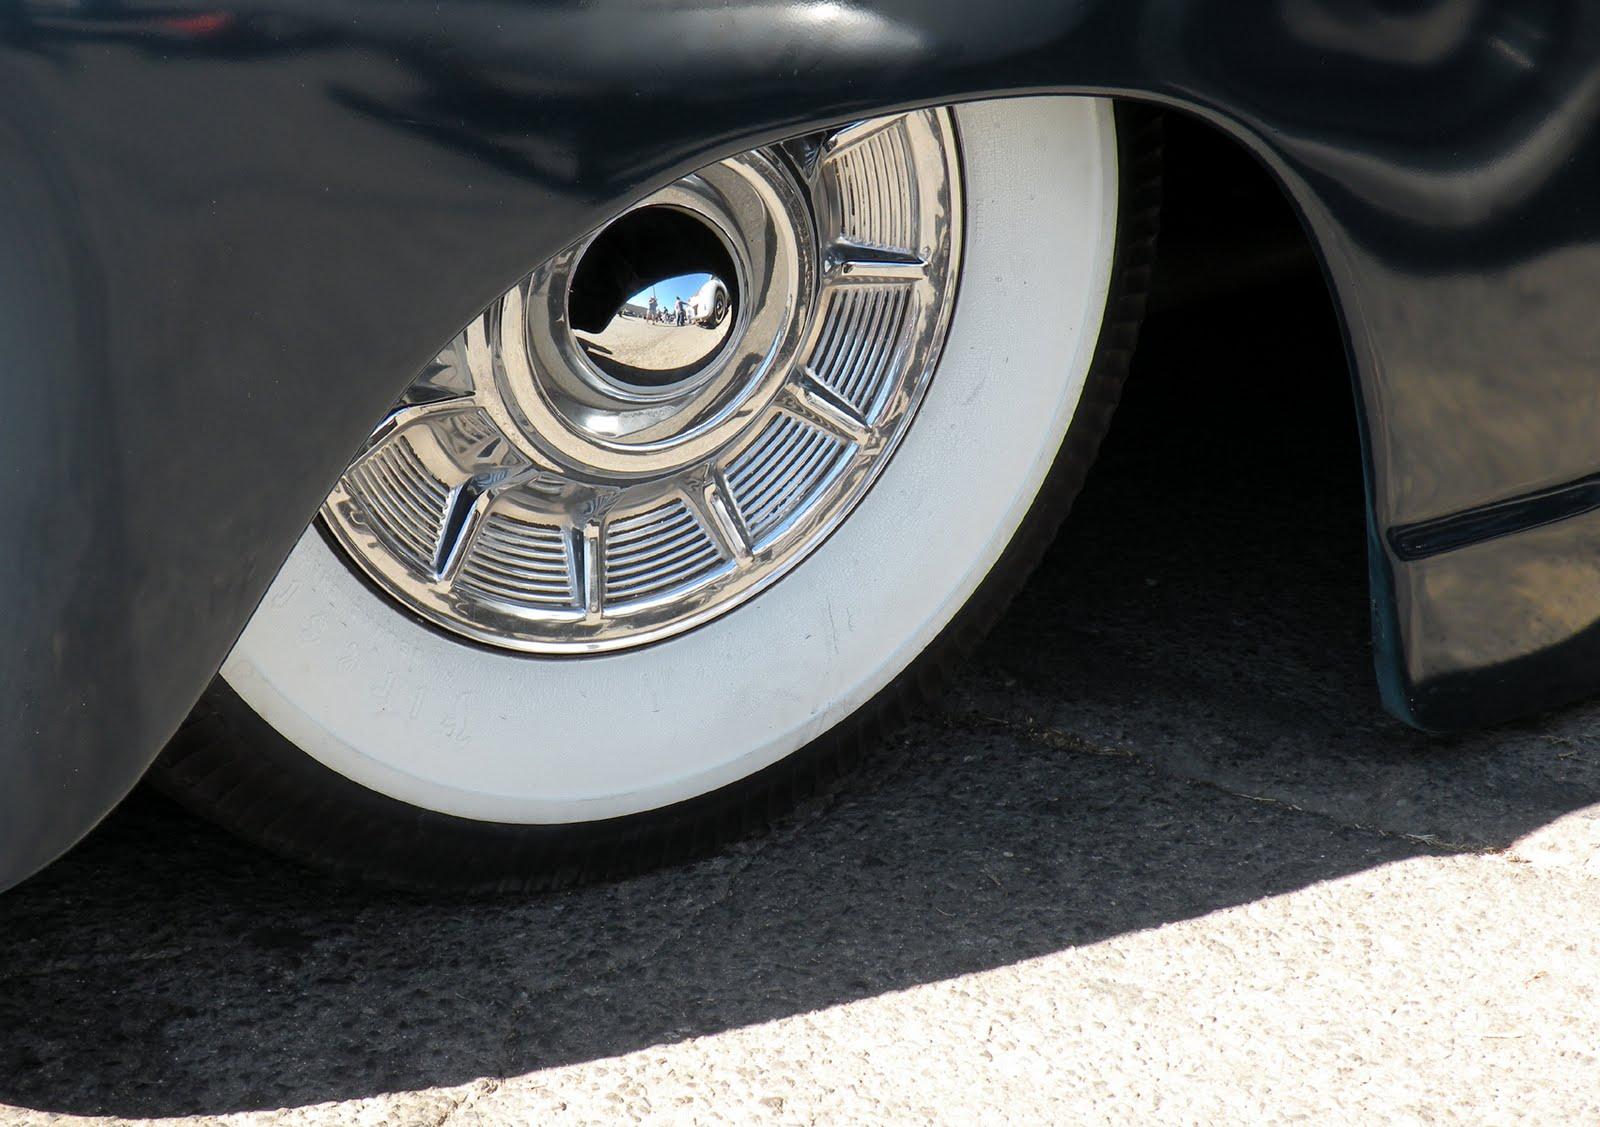 Before choosing the rims and tires you need to check out the wide and variety selection of rims, wheels for speeding up the vehicle when you are on the